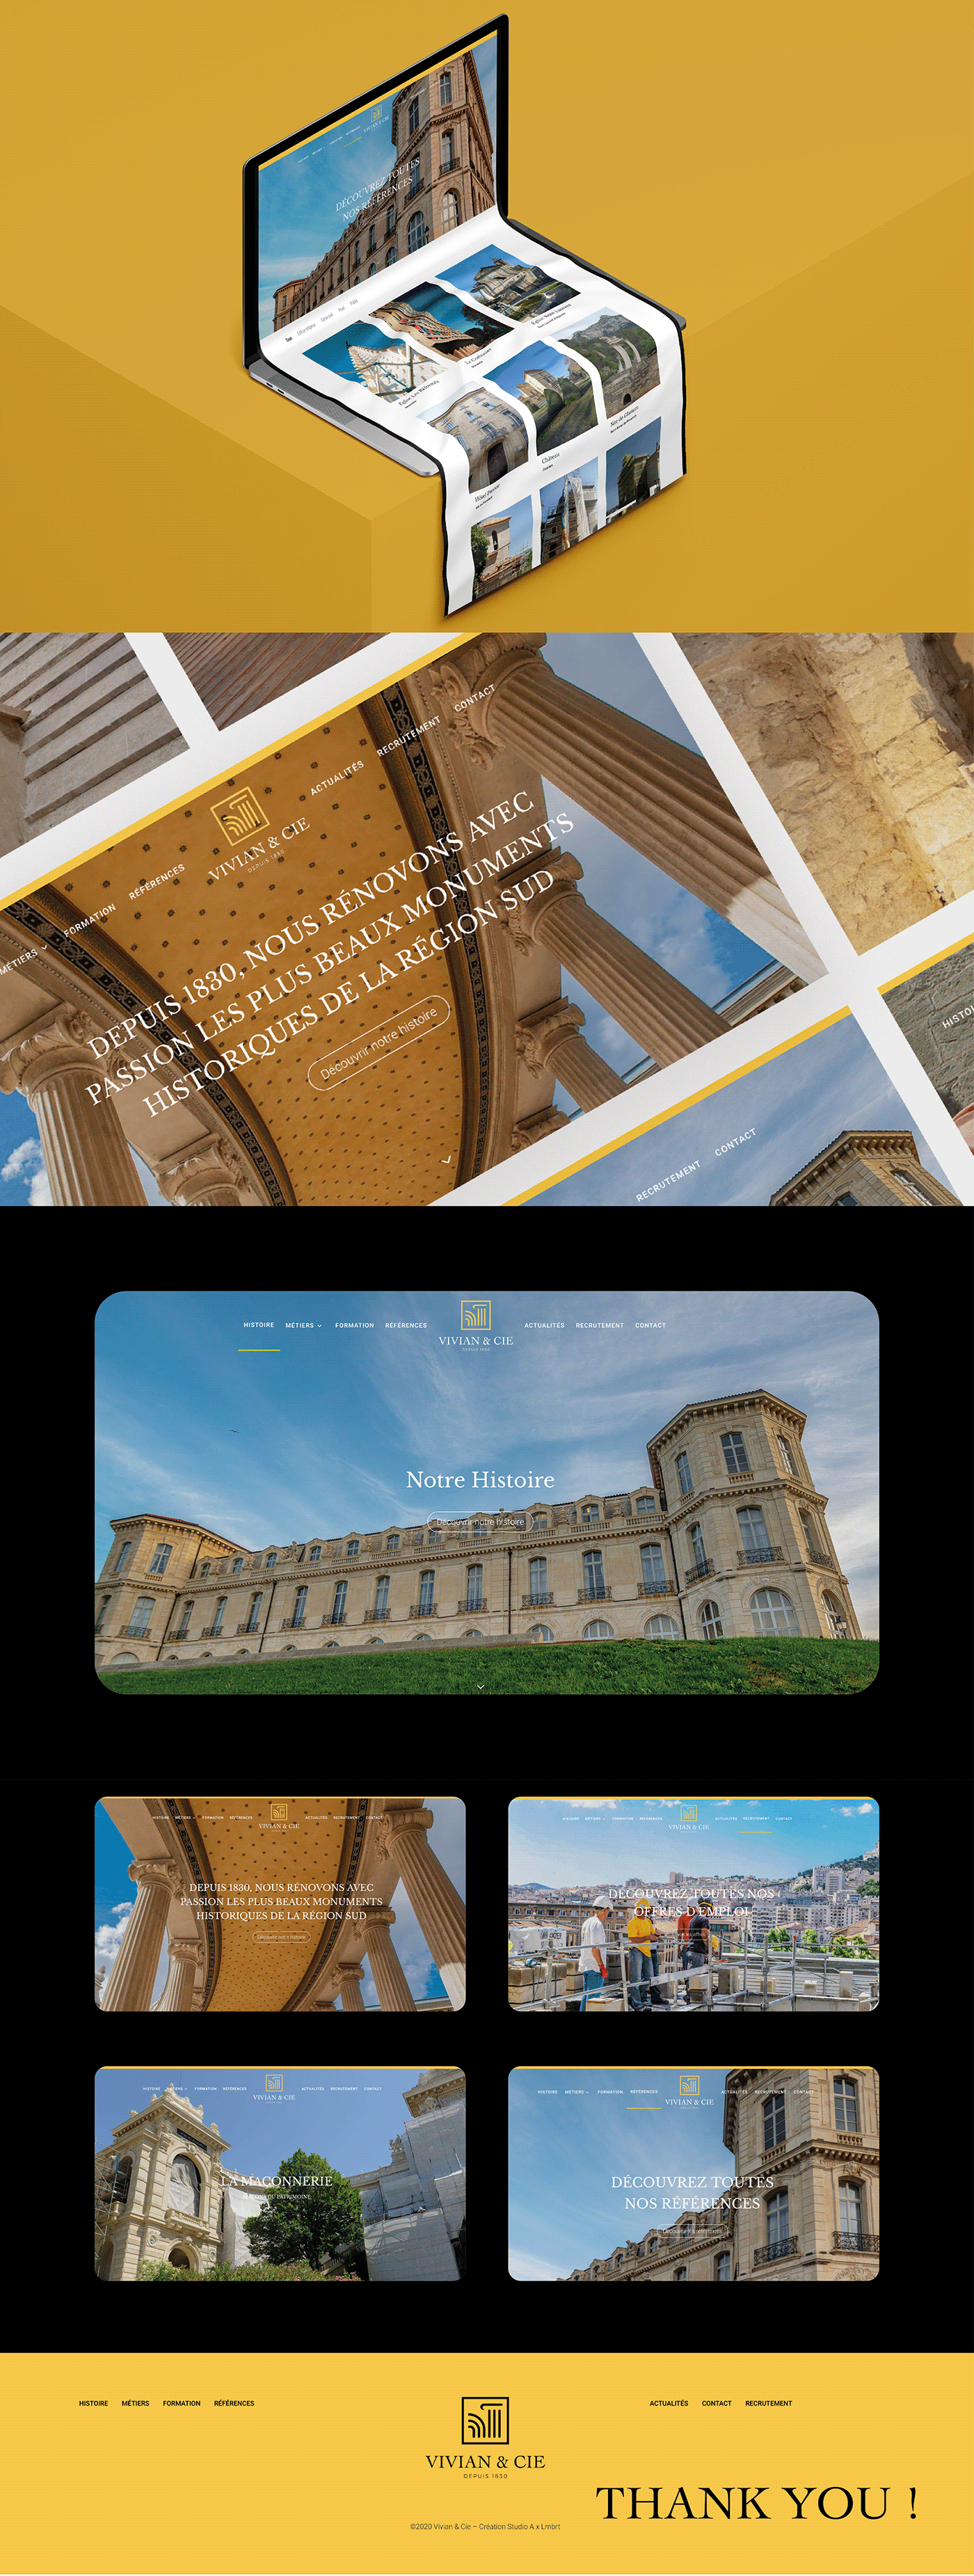 artistic direction brand historic marseille monument museum stationnery statue visual identity yellow